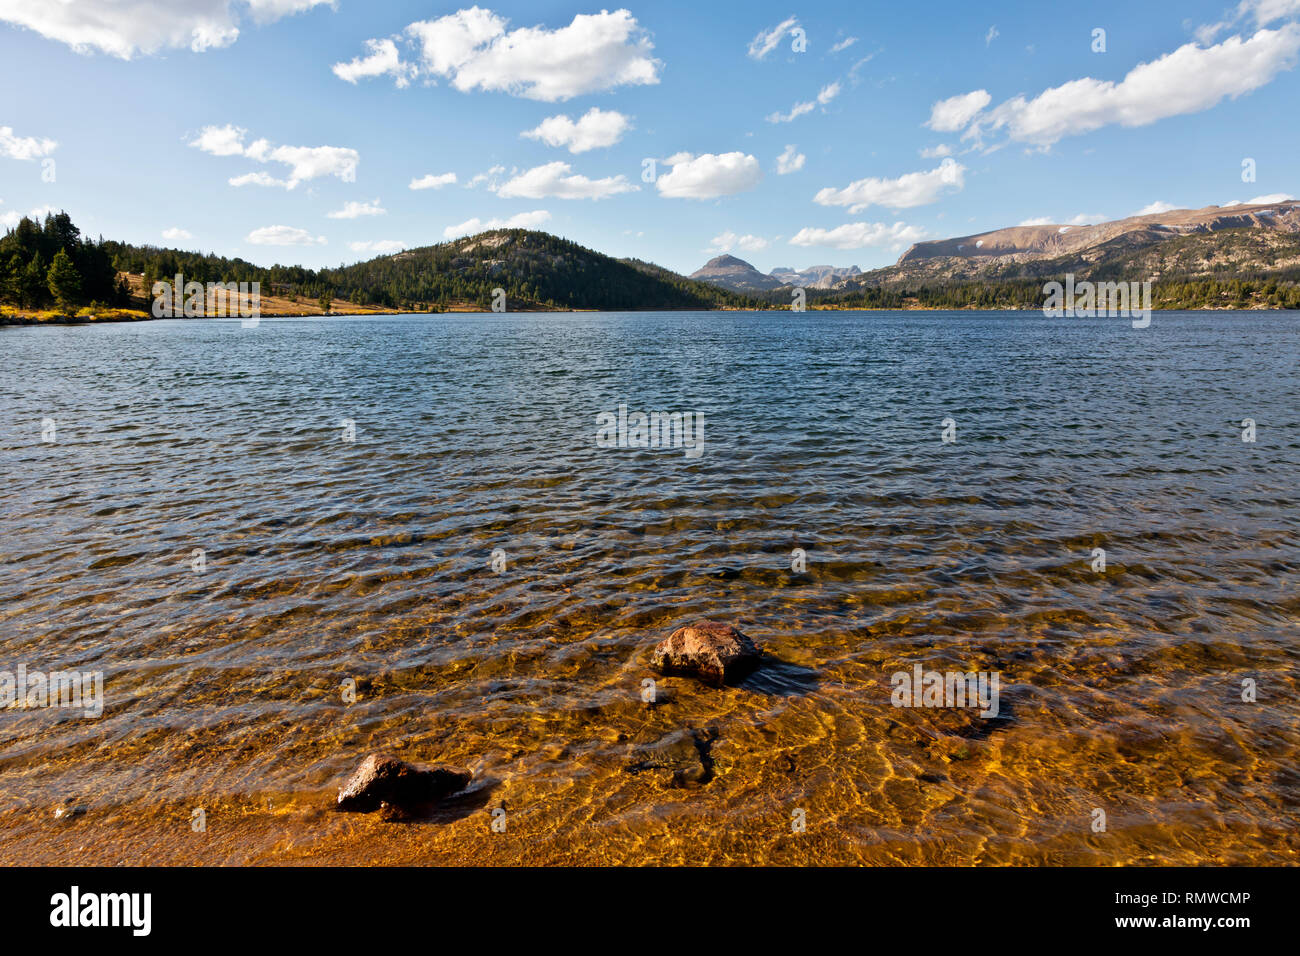 WY03775-00...WYOMING - Isola lago situato vicino la Beartooth Scenic Byway nel Shoshone National Forest. Foto Stock